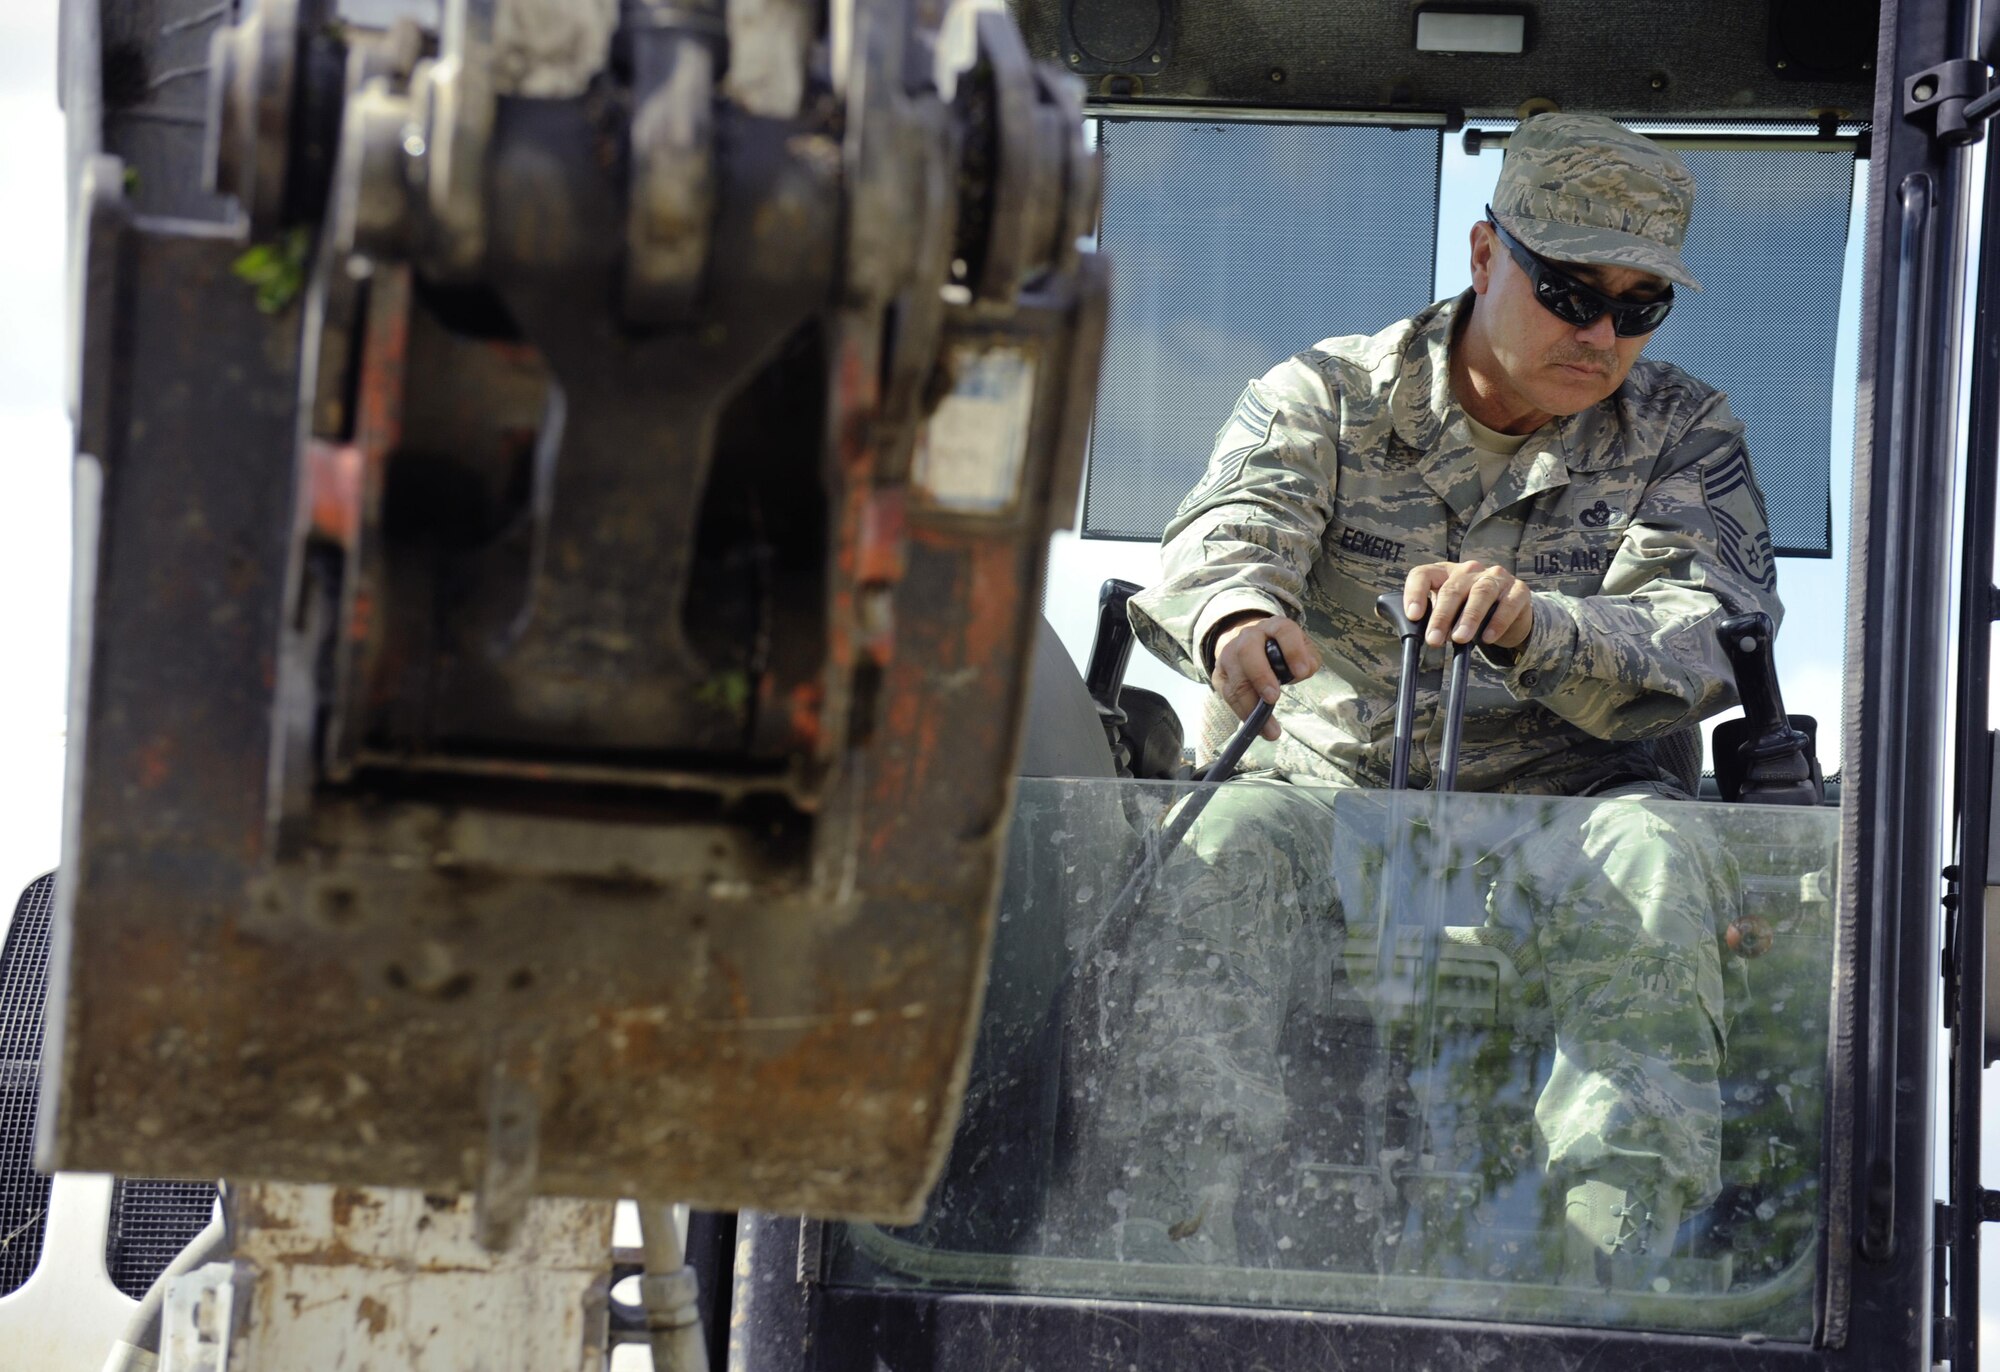 Oregon Air National Guard Chief Master Sgt. Ronald Eckert, 142nd Fighter Wing Civil Engineers (CES), operates a excavator to load rock and other materials used to build a new trail at Niven Lake, Yellowknife, Northern Territories, Canada, July 18, 2017. Over 30 CES members are spending two-weeks in Canada working on a variety of projects during their Deployment for Training (DFT). (U.S. Air National Guard photo/Master Sgt. John Hughel, 142nd Fighter Wing Public Affairs)